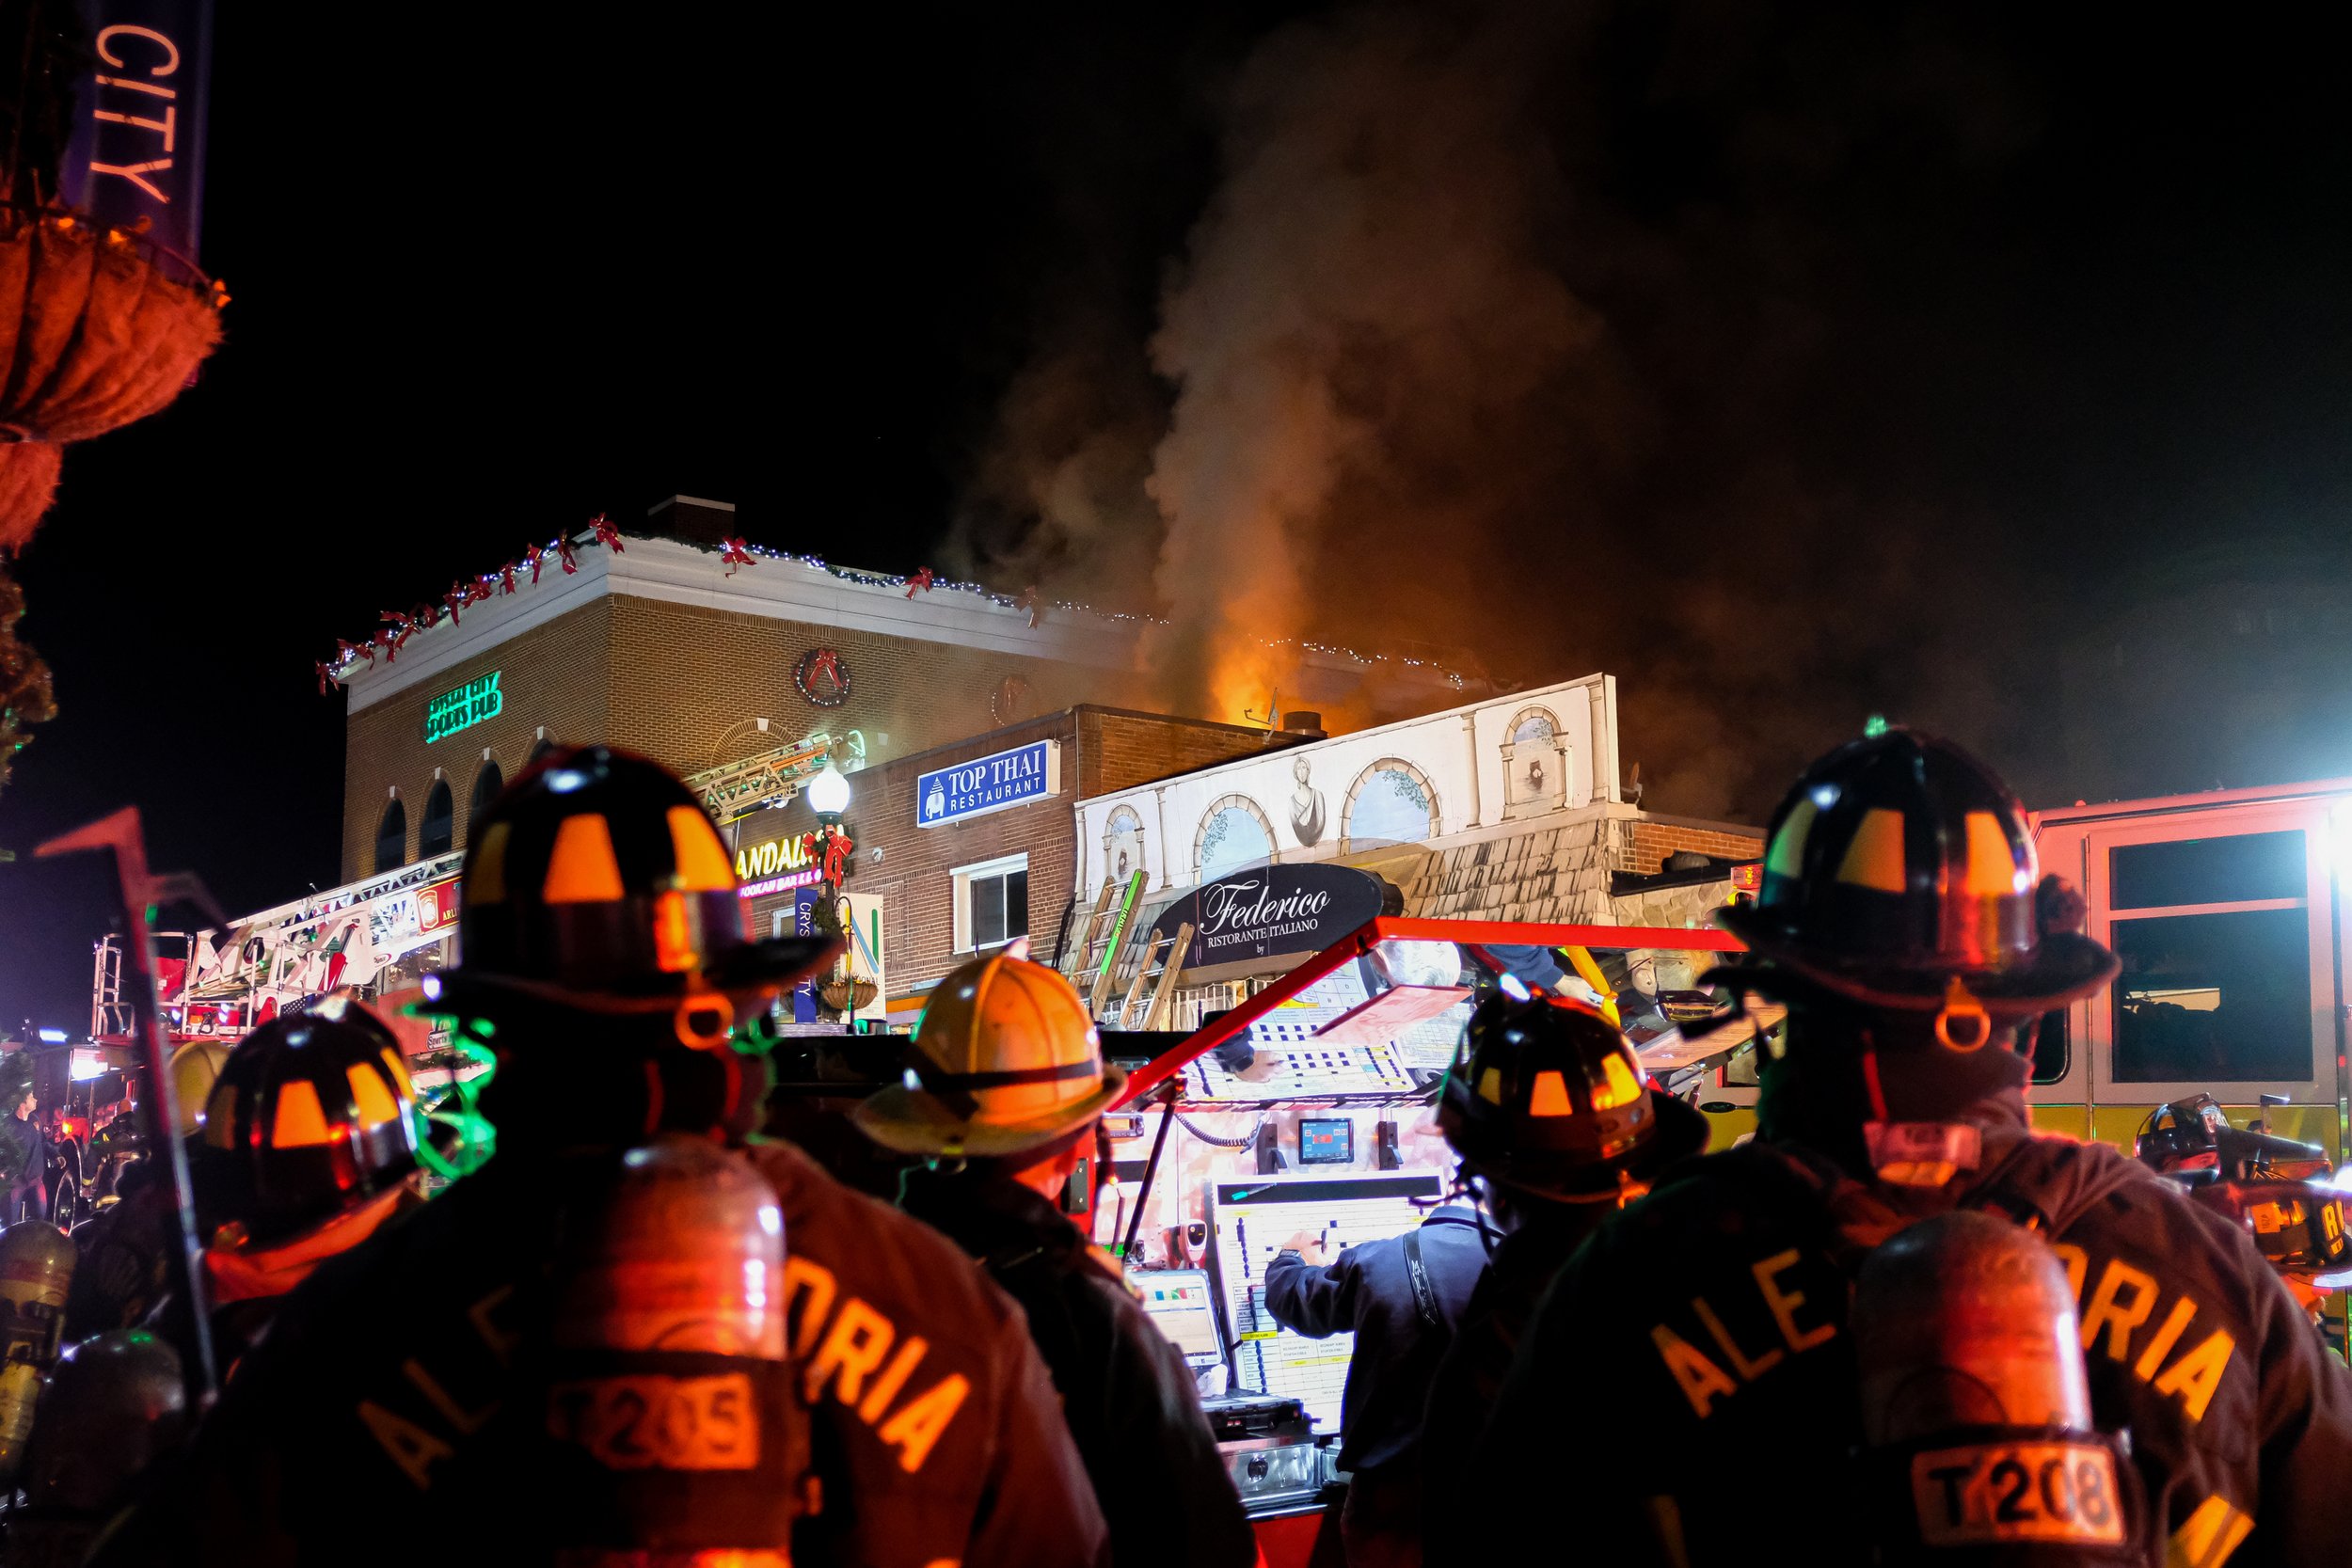  Firefighters from multiple departments respond to a fire on 23rd Street in Crystal City in Arlington, VA on the evening of December 4, 2021.  